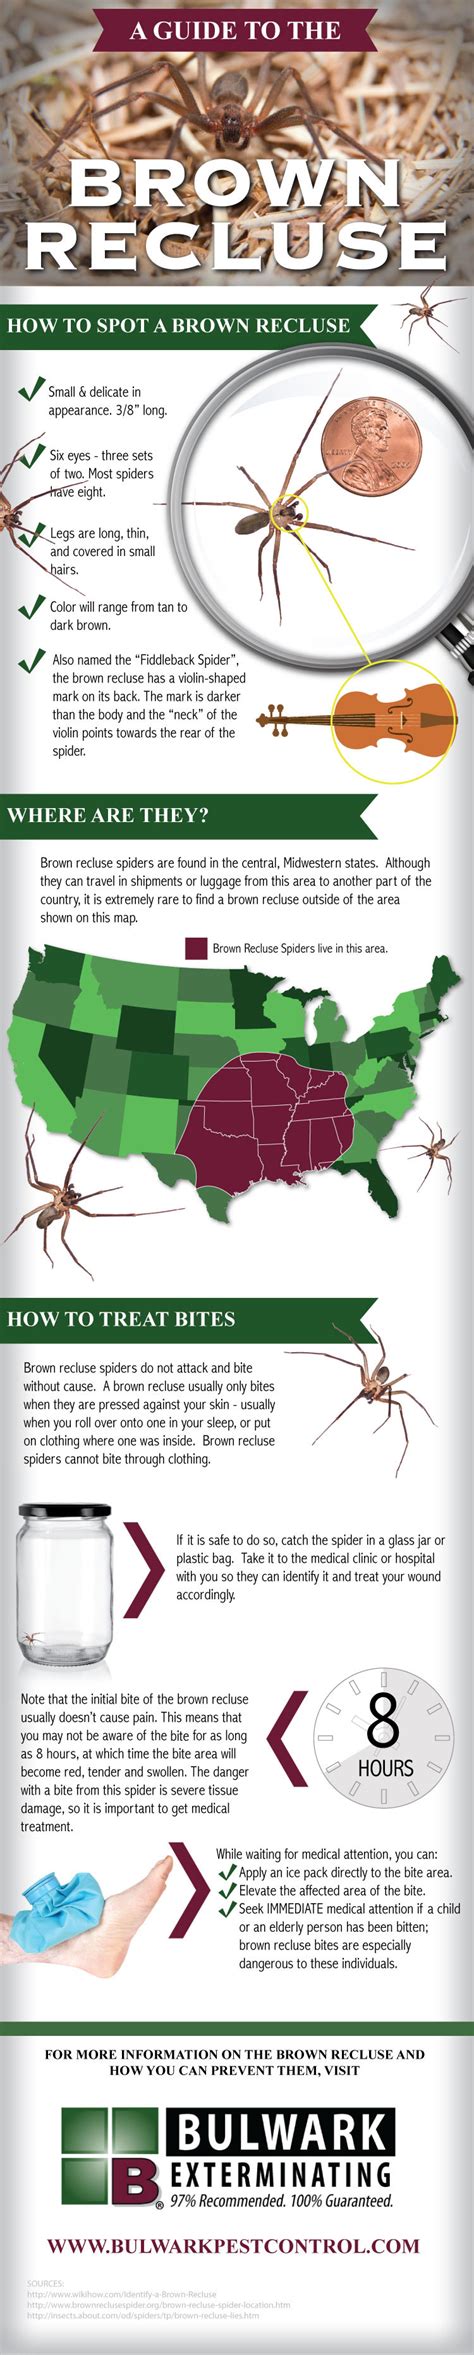 A Guide To The Brown Recluse Infographic Brownrecluse Brown